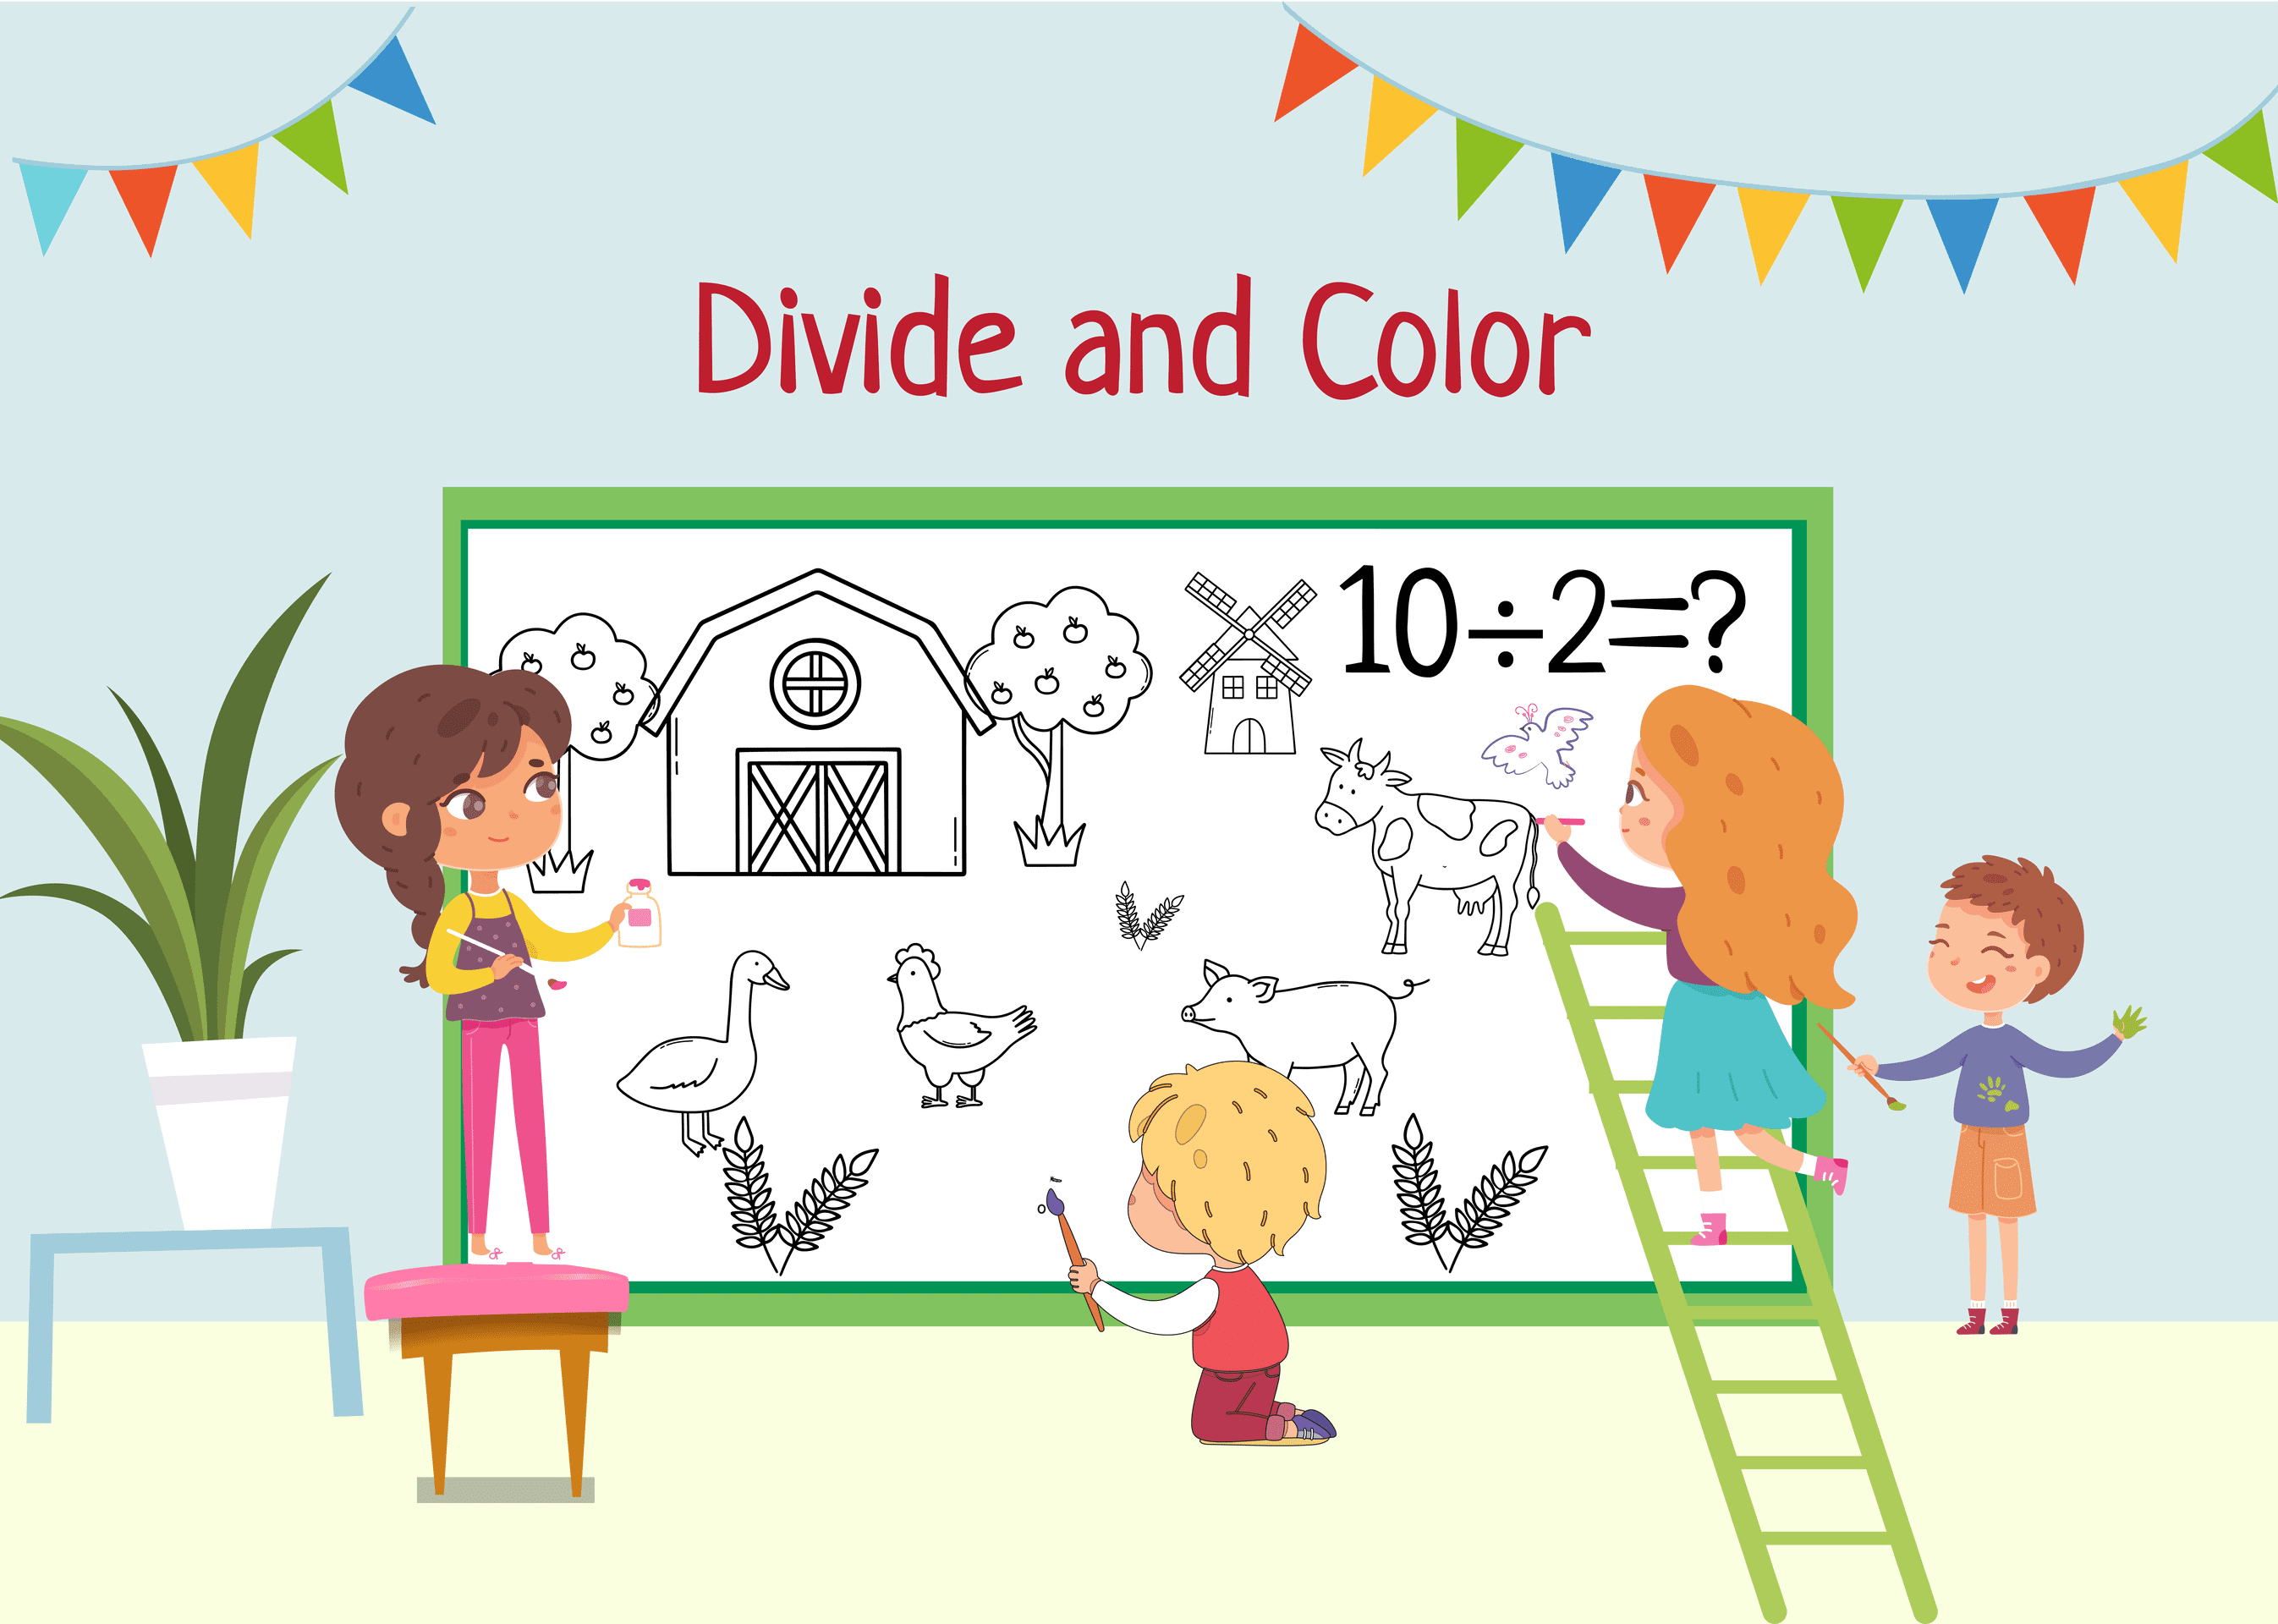 Divide Numbers to Color the Farm.